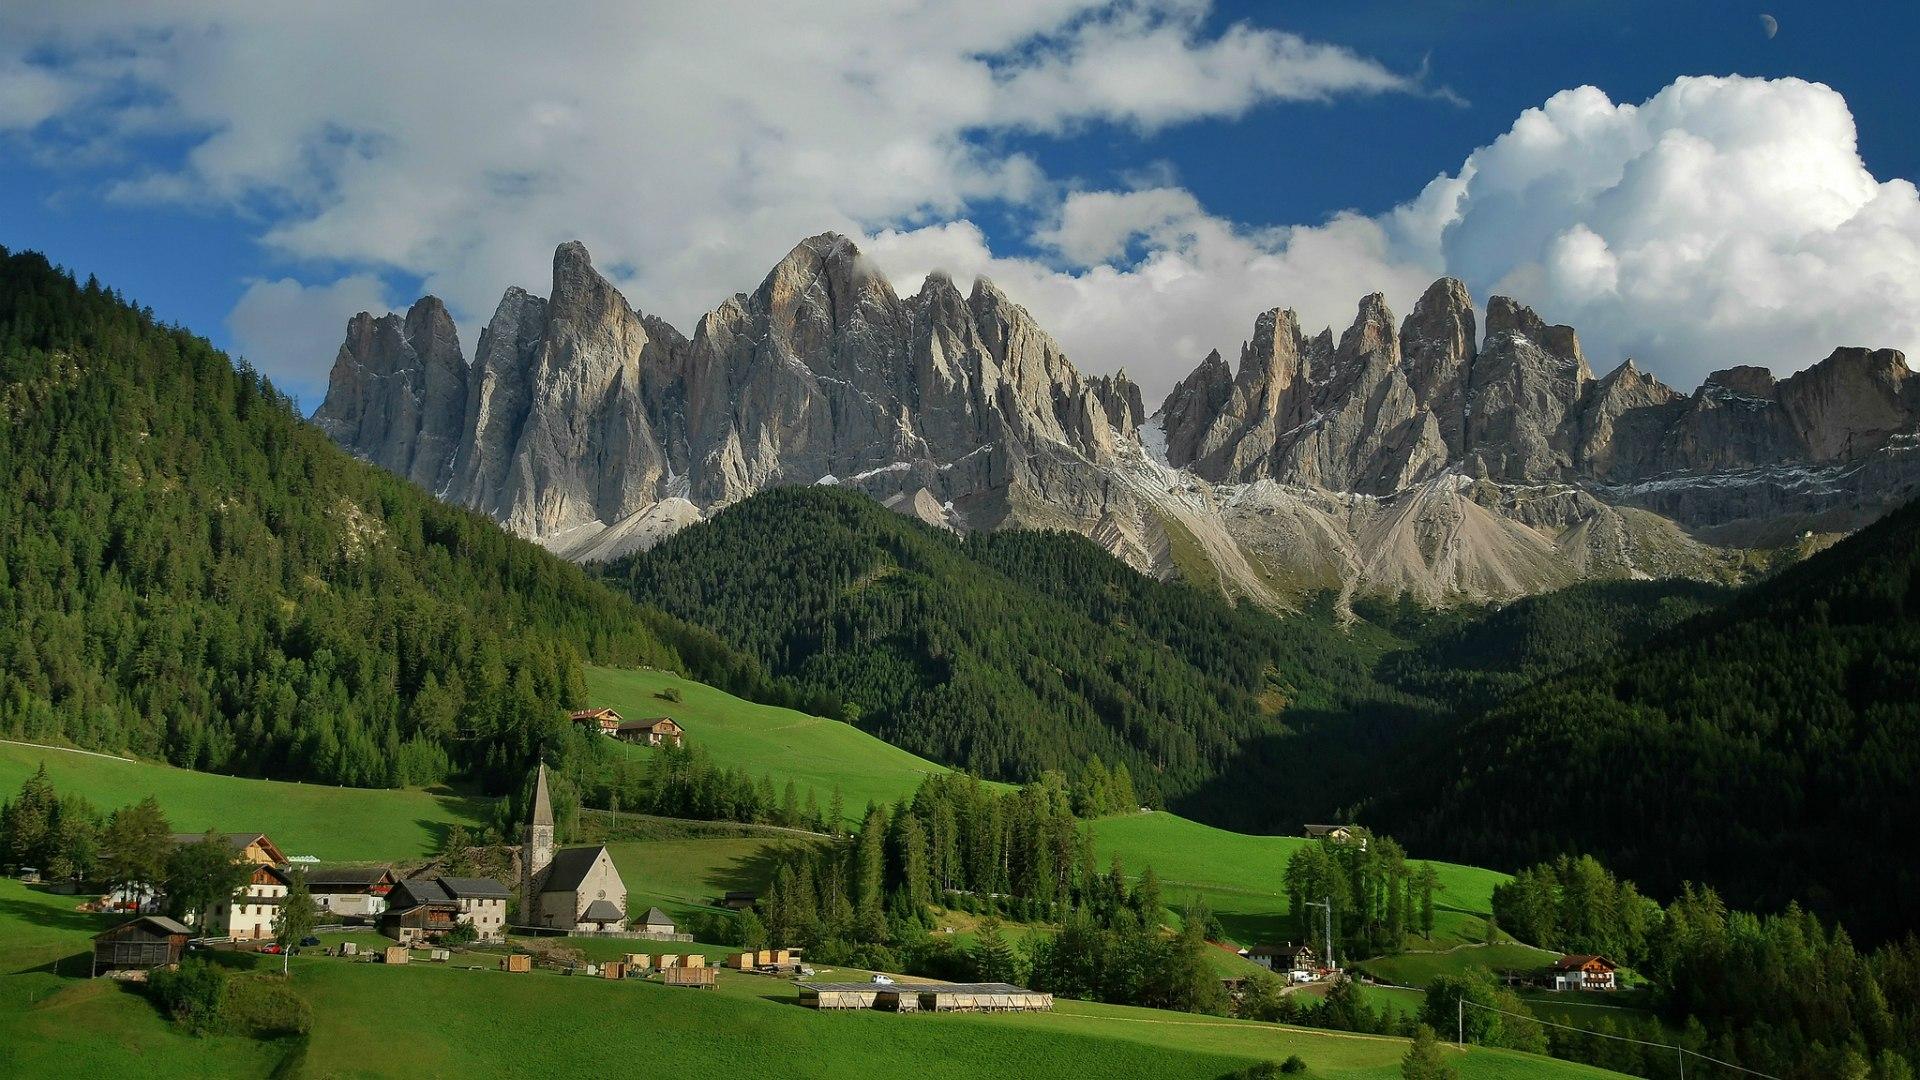 Dolomites Mountains, Italy wallpaper and image